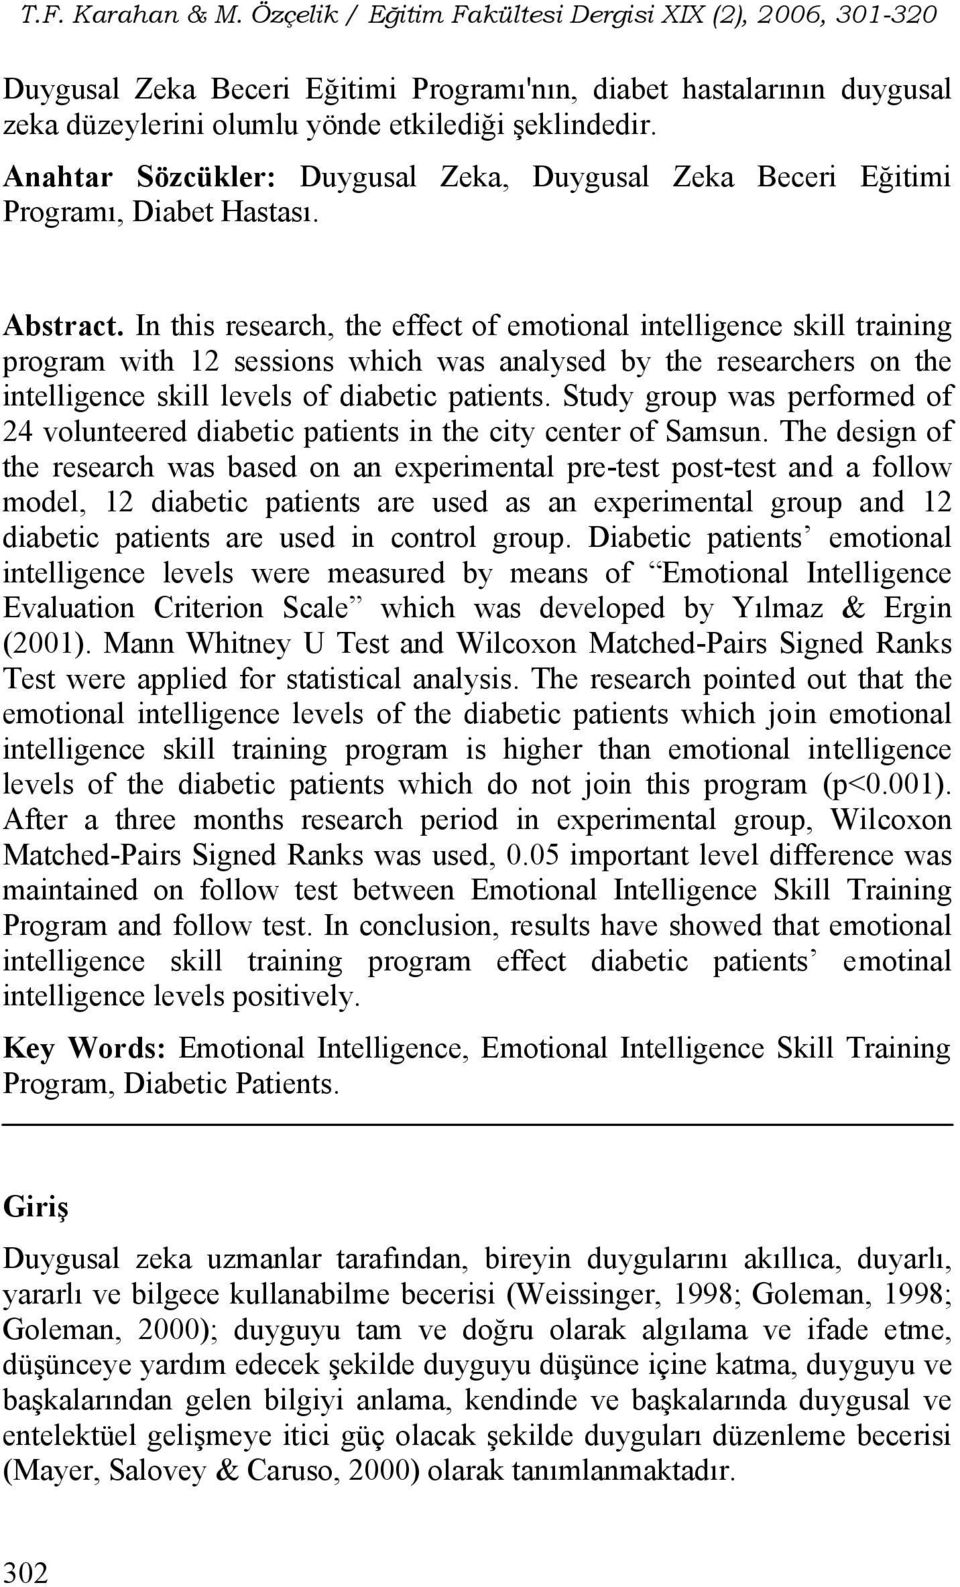 In this research, the effect of emotional intelligence skill training program with 12 sessions which was analysed by the researchers on the intelligence skill levels of diabetic patients.